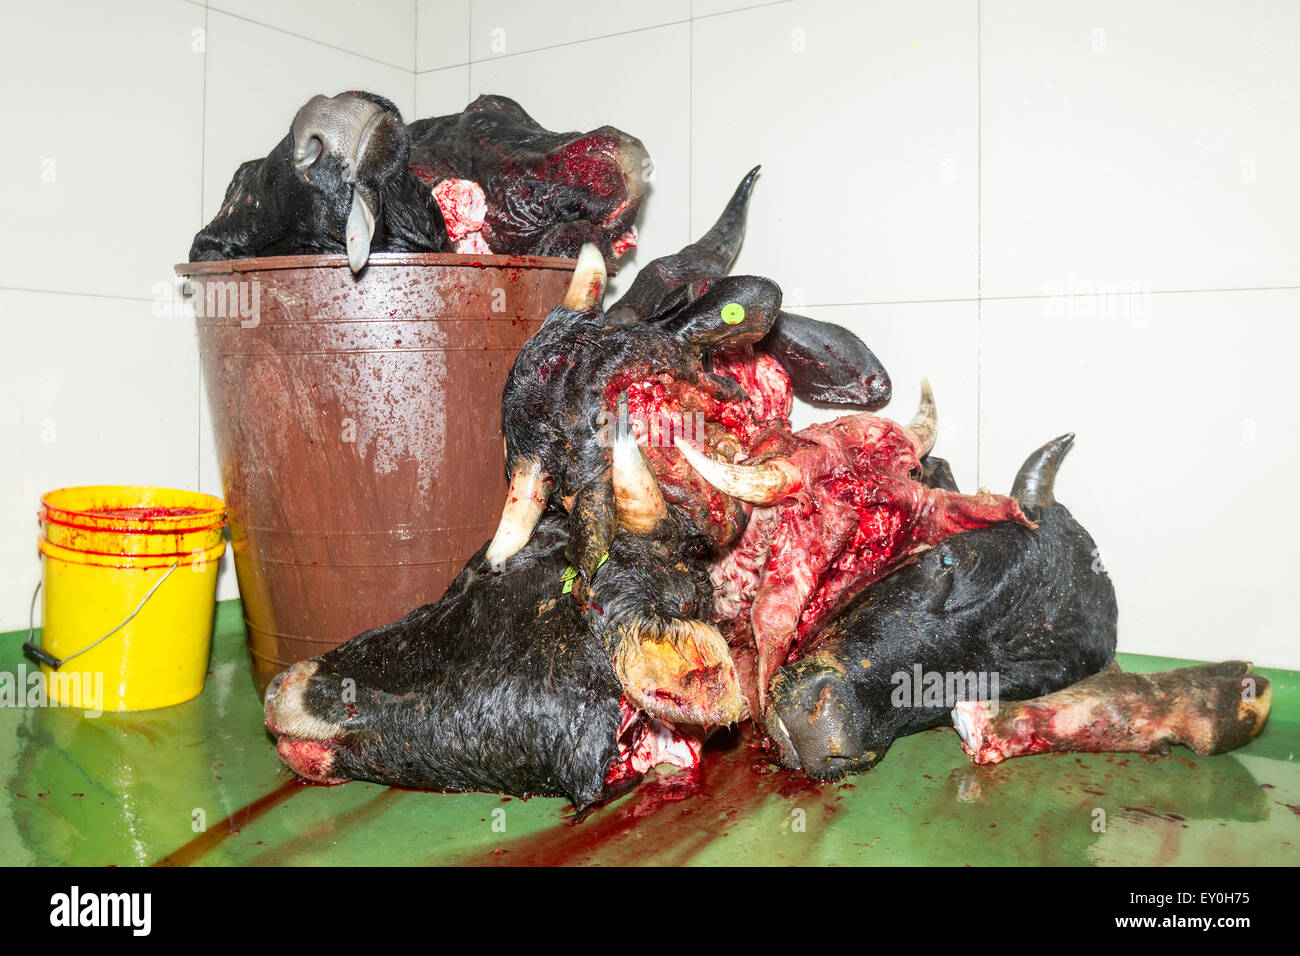 PILE OF ANIMAL HEADS AFTER DECAPITATION IN SLAUGHTERHOUSE HORROR SCENE Stock Photo